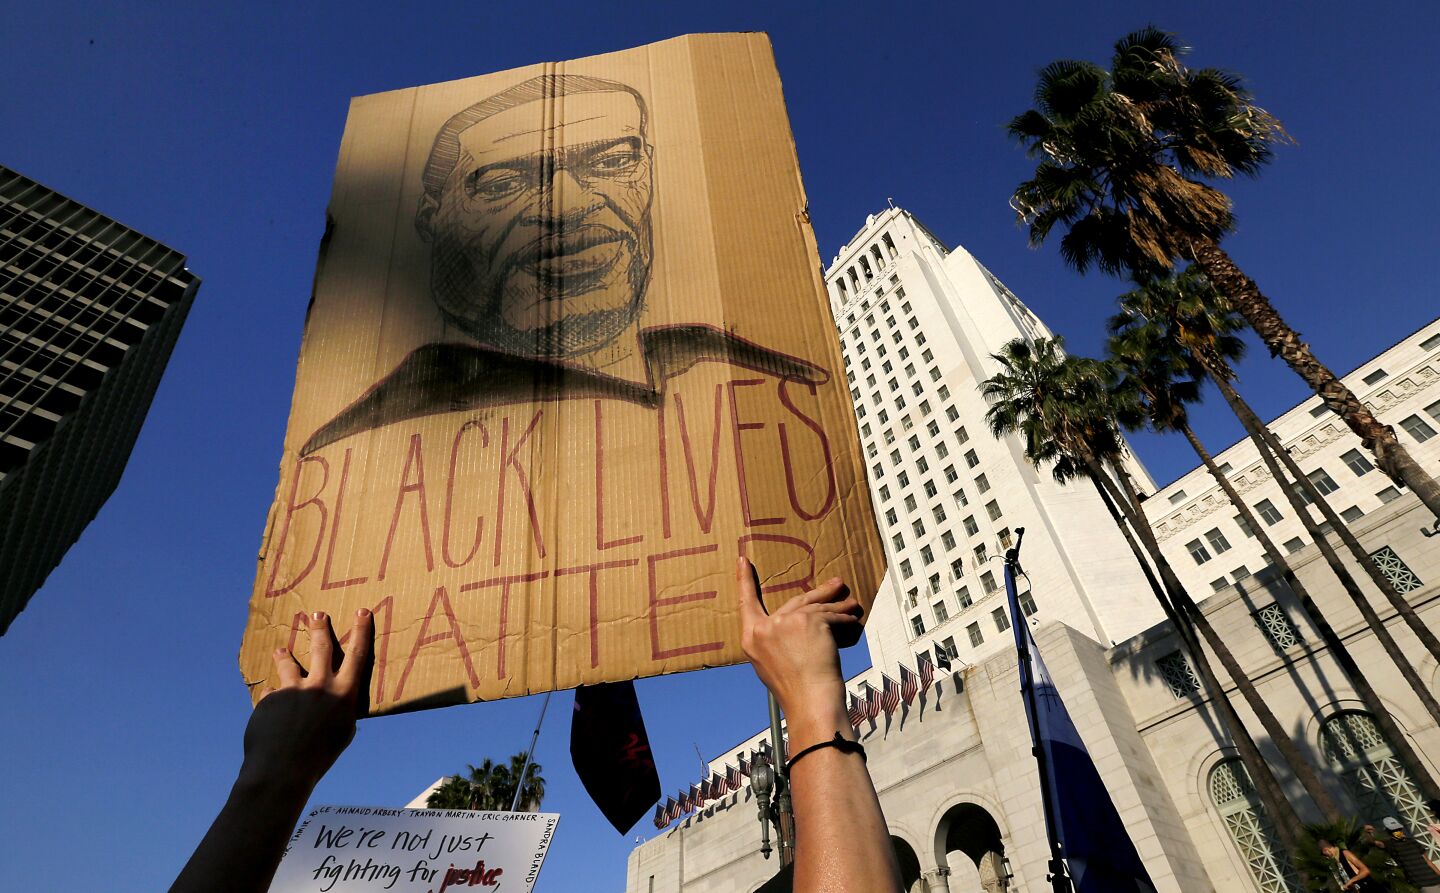 Protesters gather at the Los Angeles Civic Center to demonstrate for justice and against police brutality.